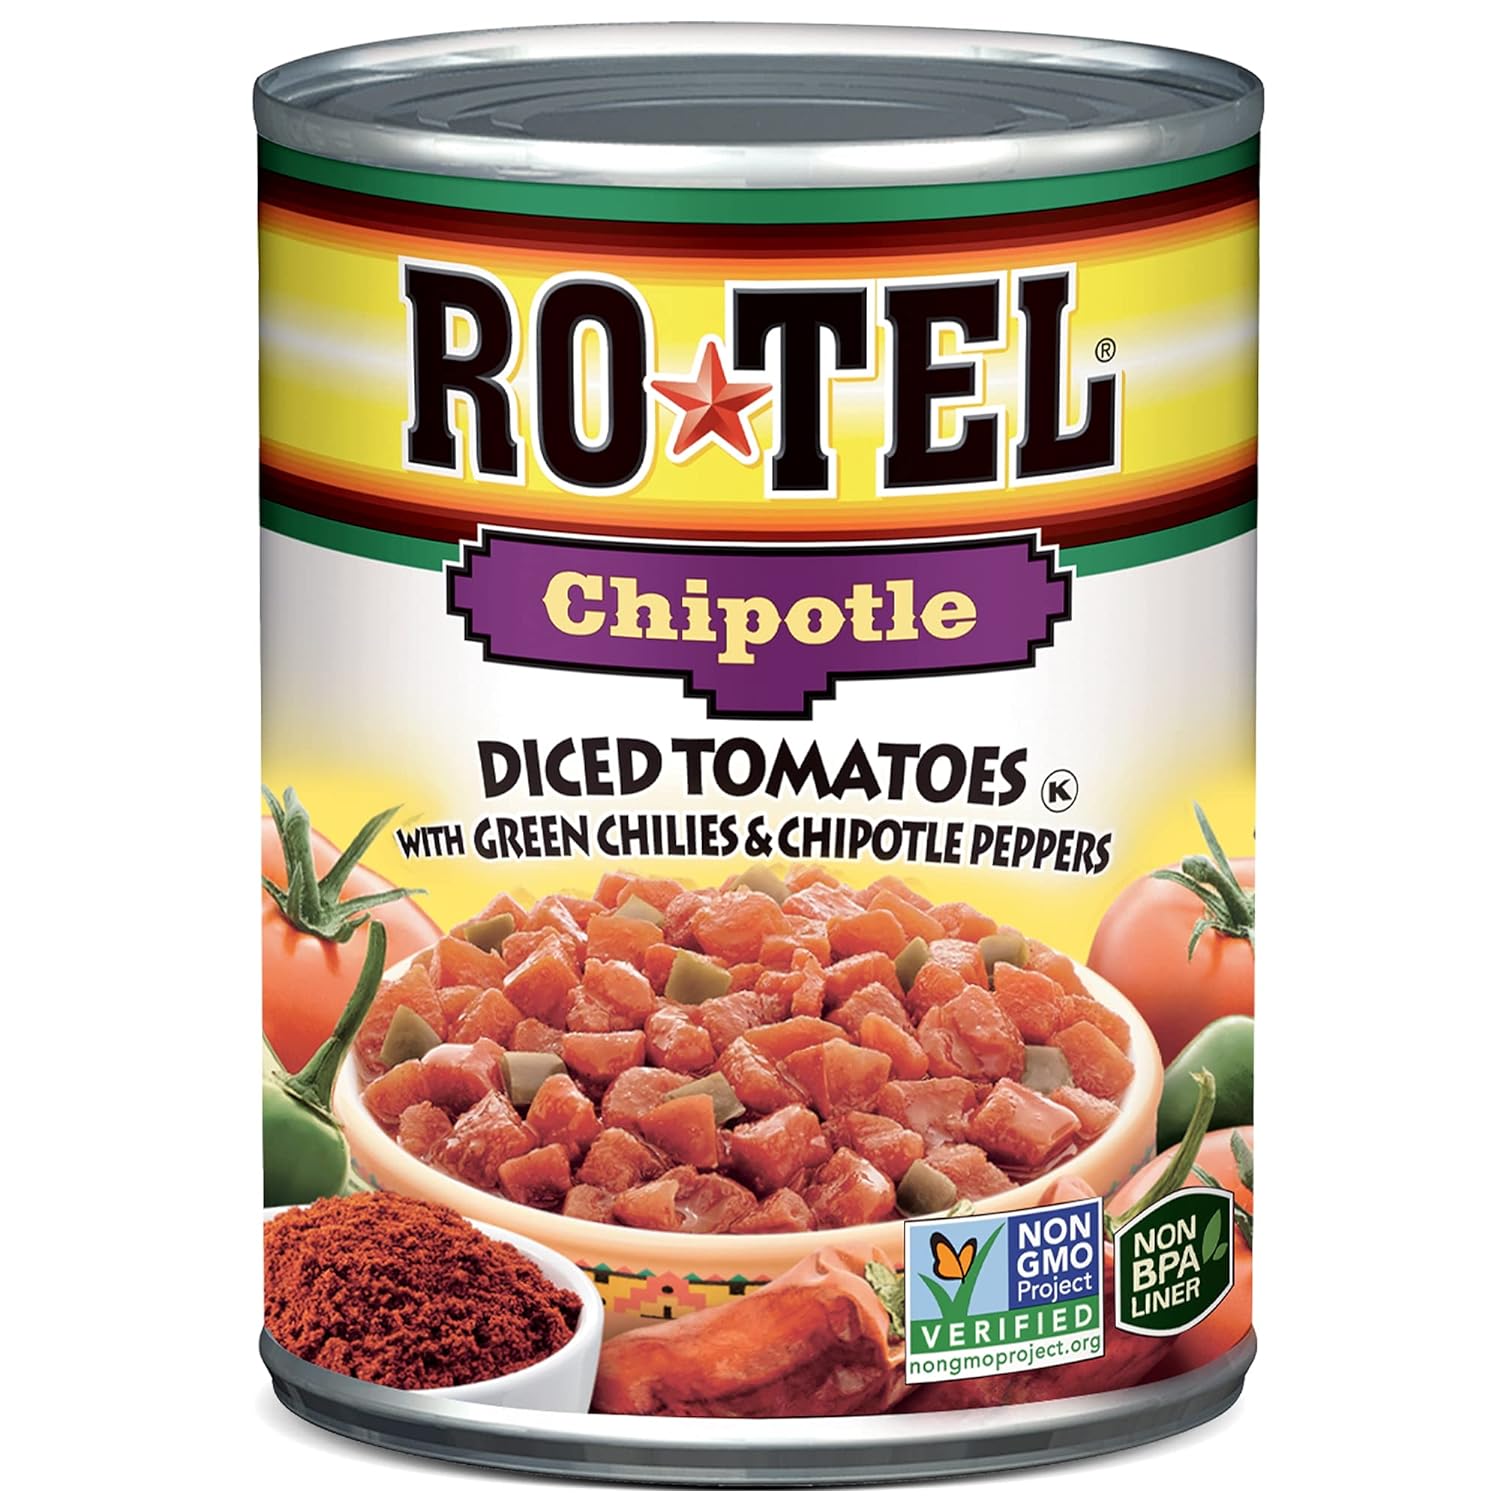 RO-TEL Chipotle Diced Tomatoes with Green Chilies and Chipotle Peppers, Keto Friendly, 10 oz